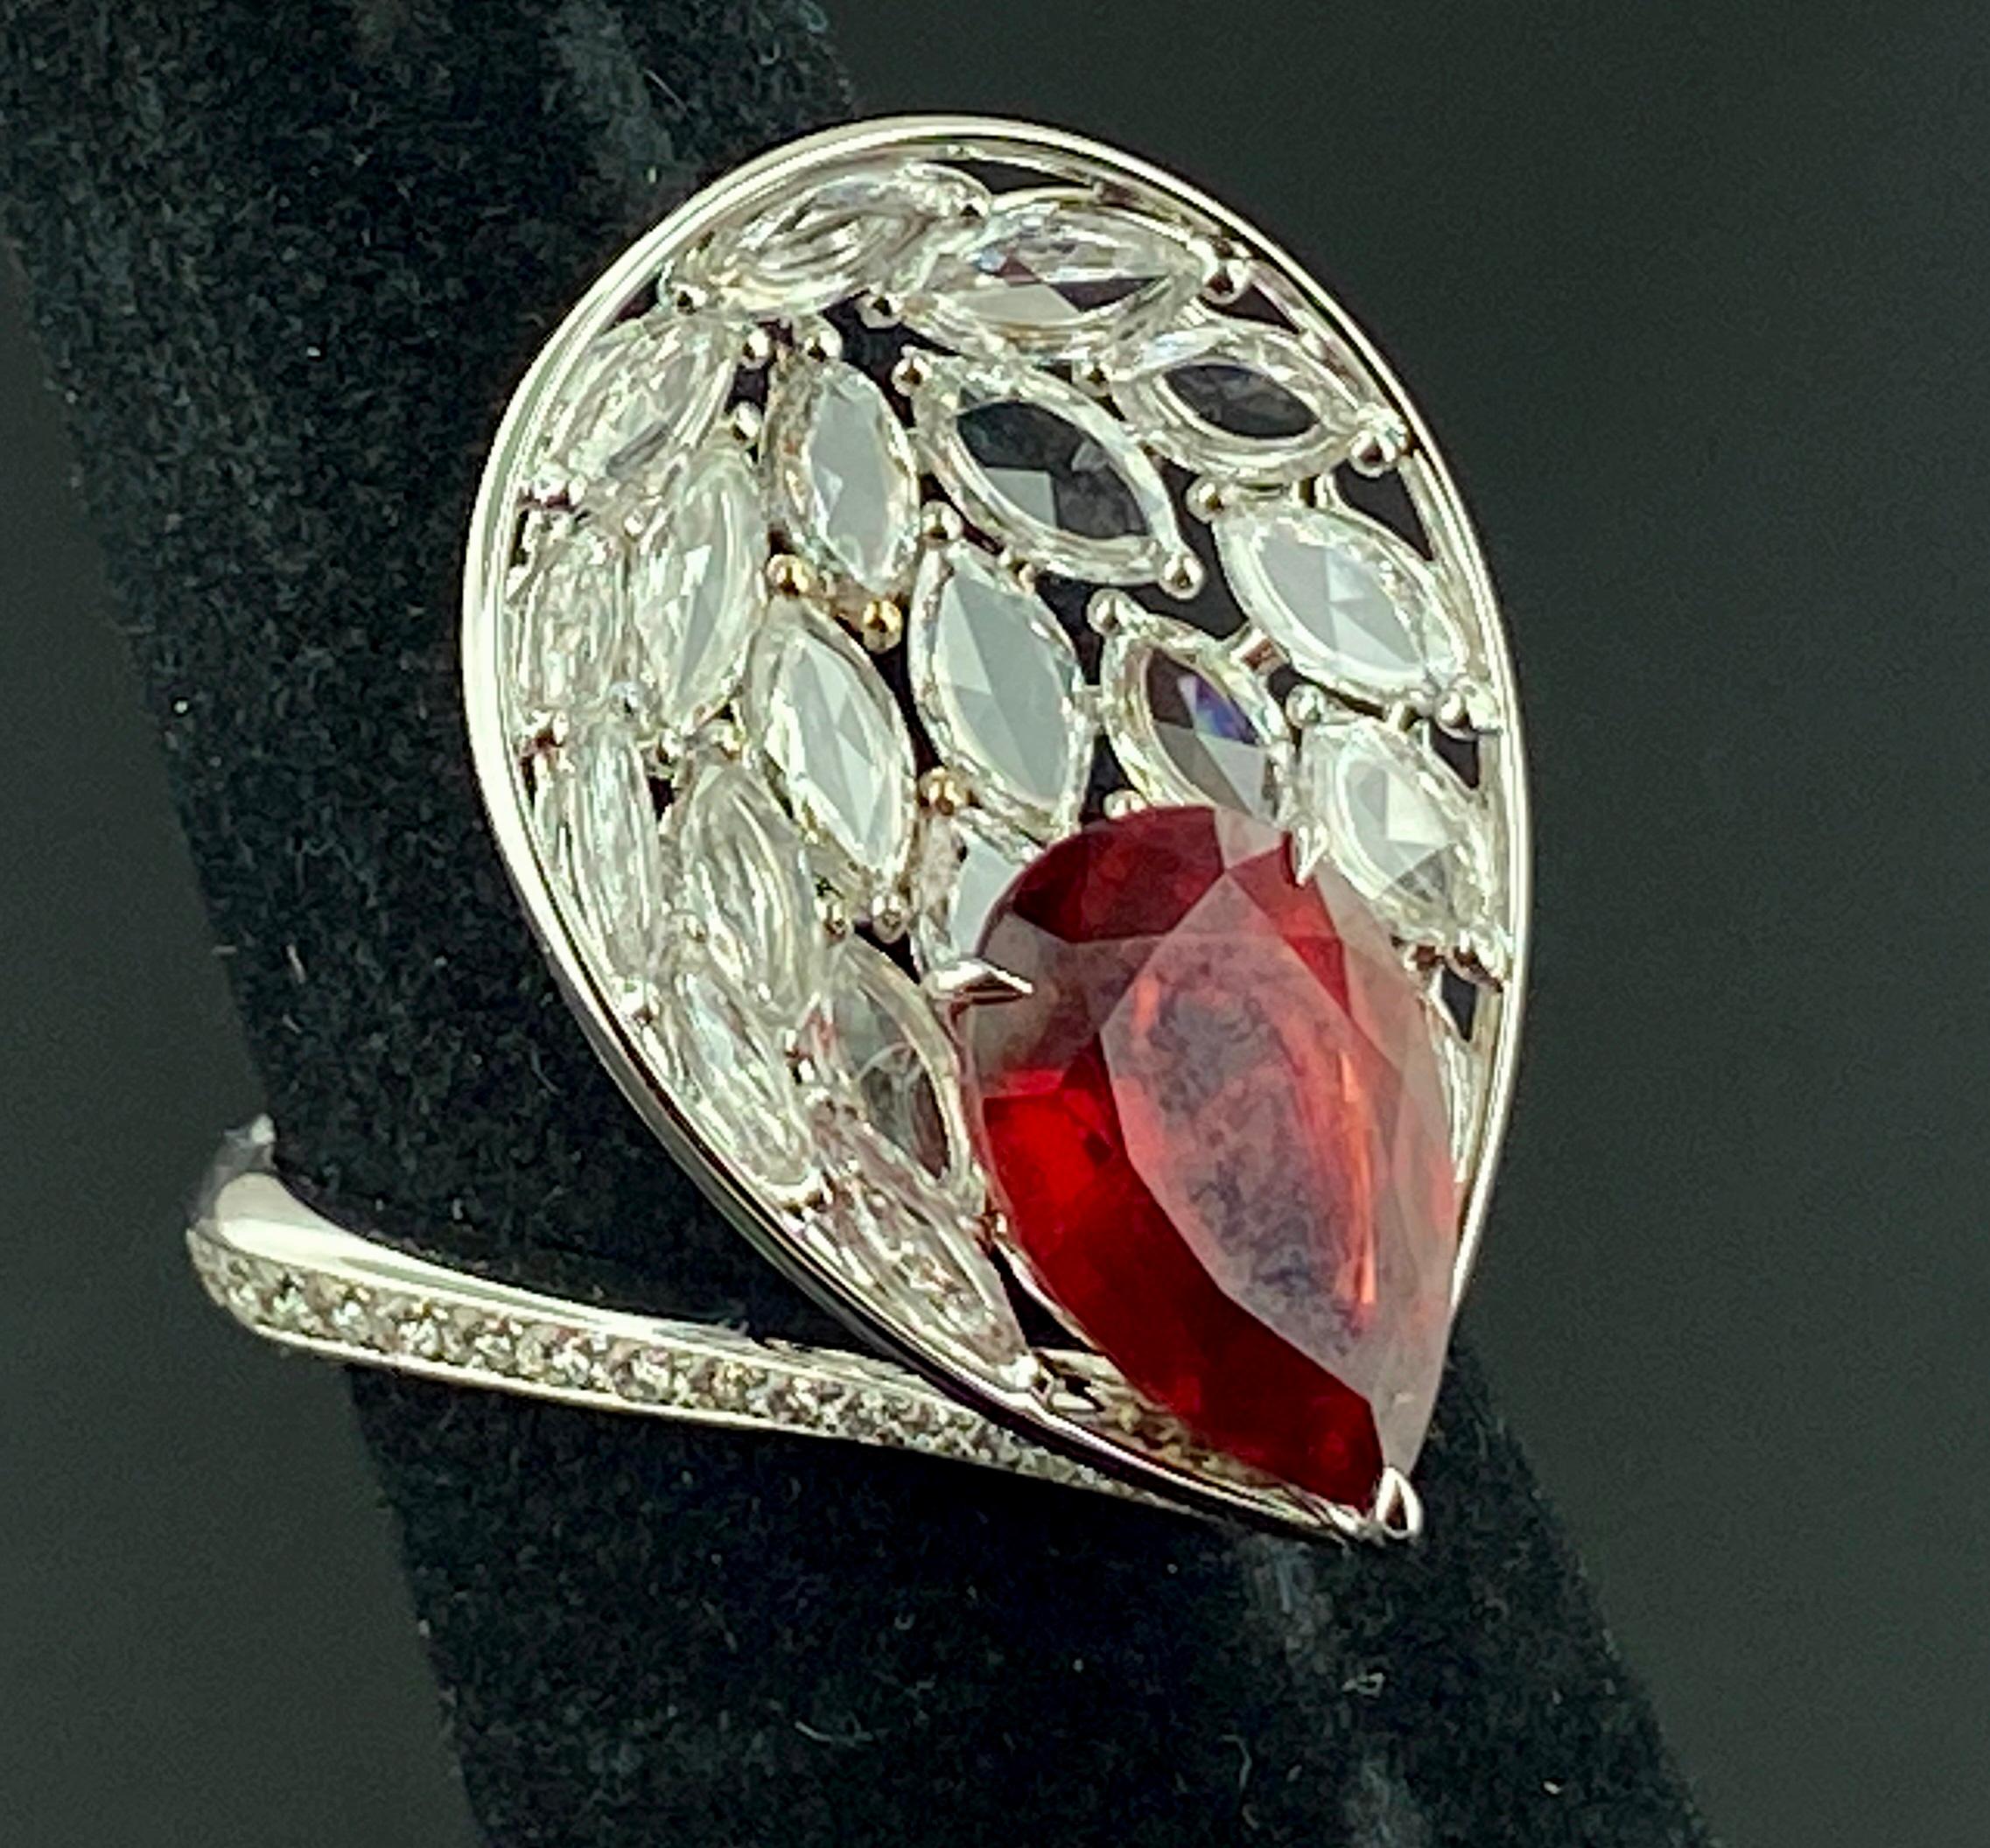 Set in 18 karat white gold is a Pear Shaped Ruby weighing 3.88 carats, along with 21 marquise shaped diamonds weighing 1.86 carats.  Ring size is 6.50.  Gold weight is 6 grams.
